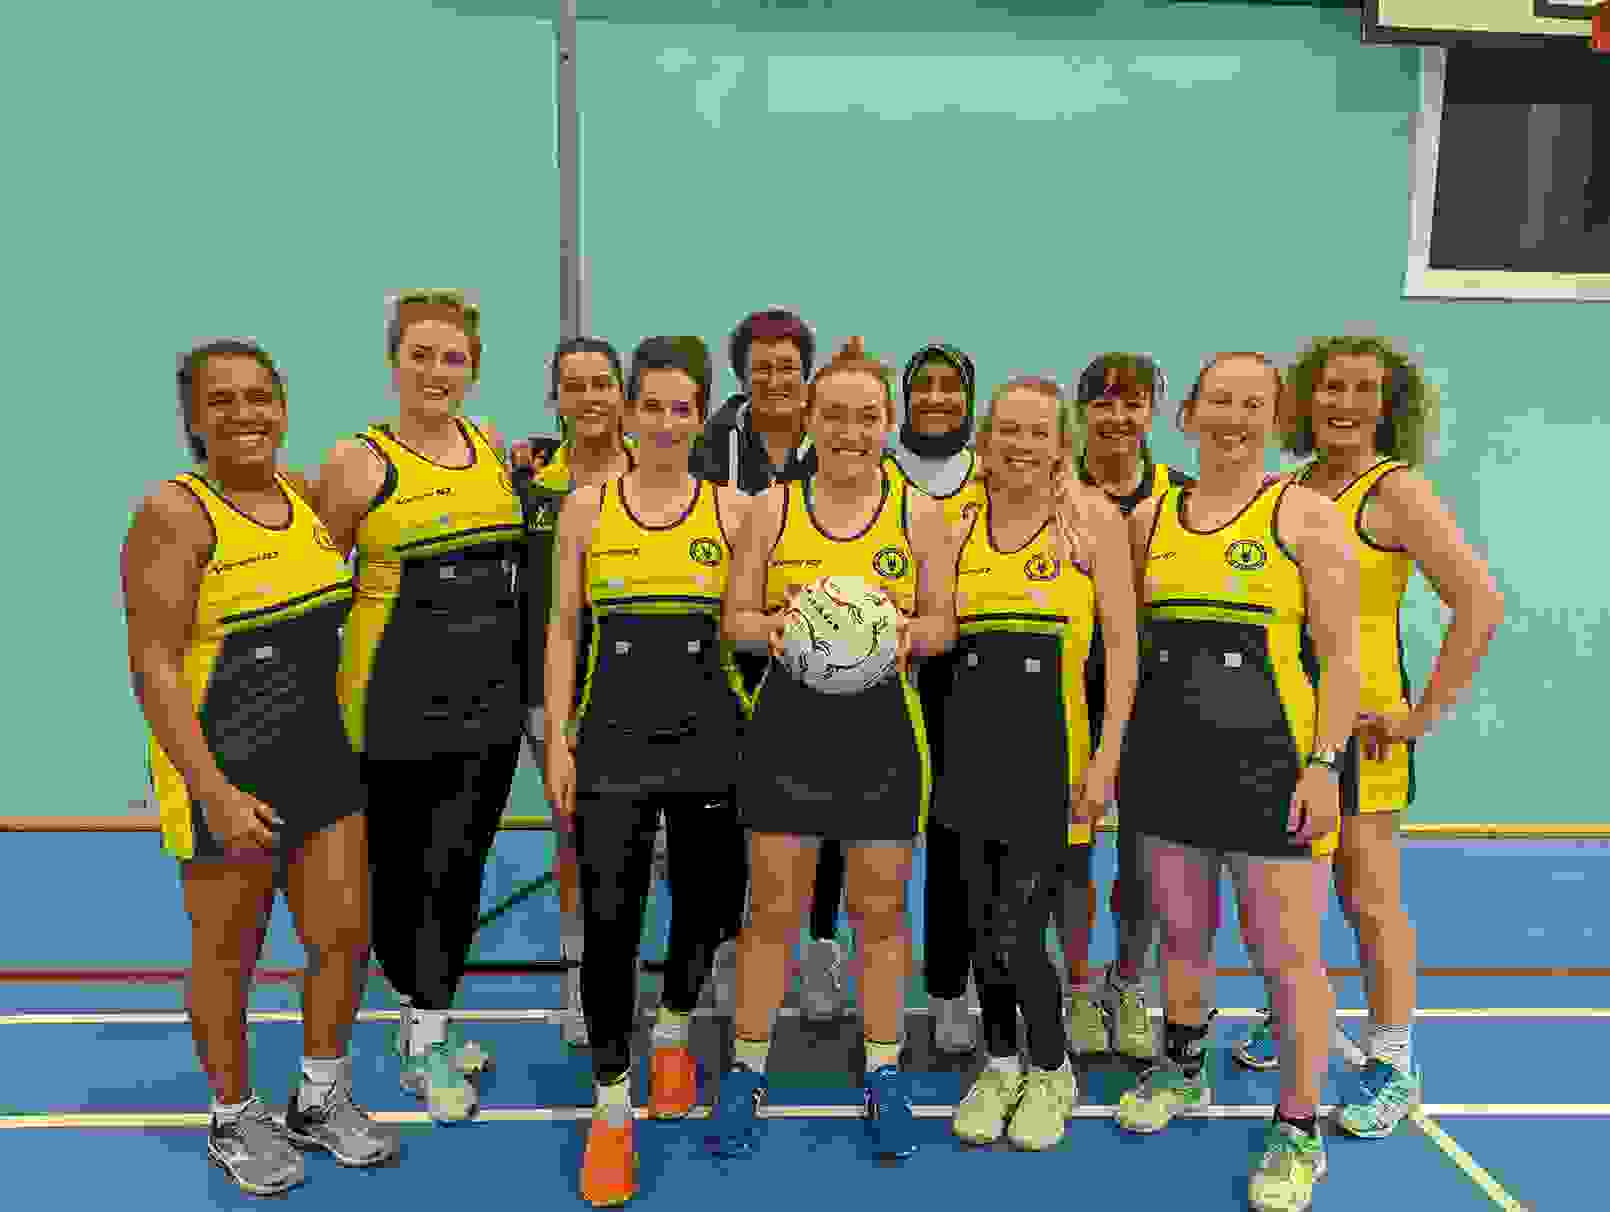 Kate and her netball team. Kate is standing in the middle of the smiling group, holding the ball.